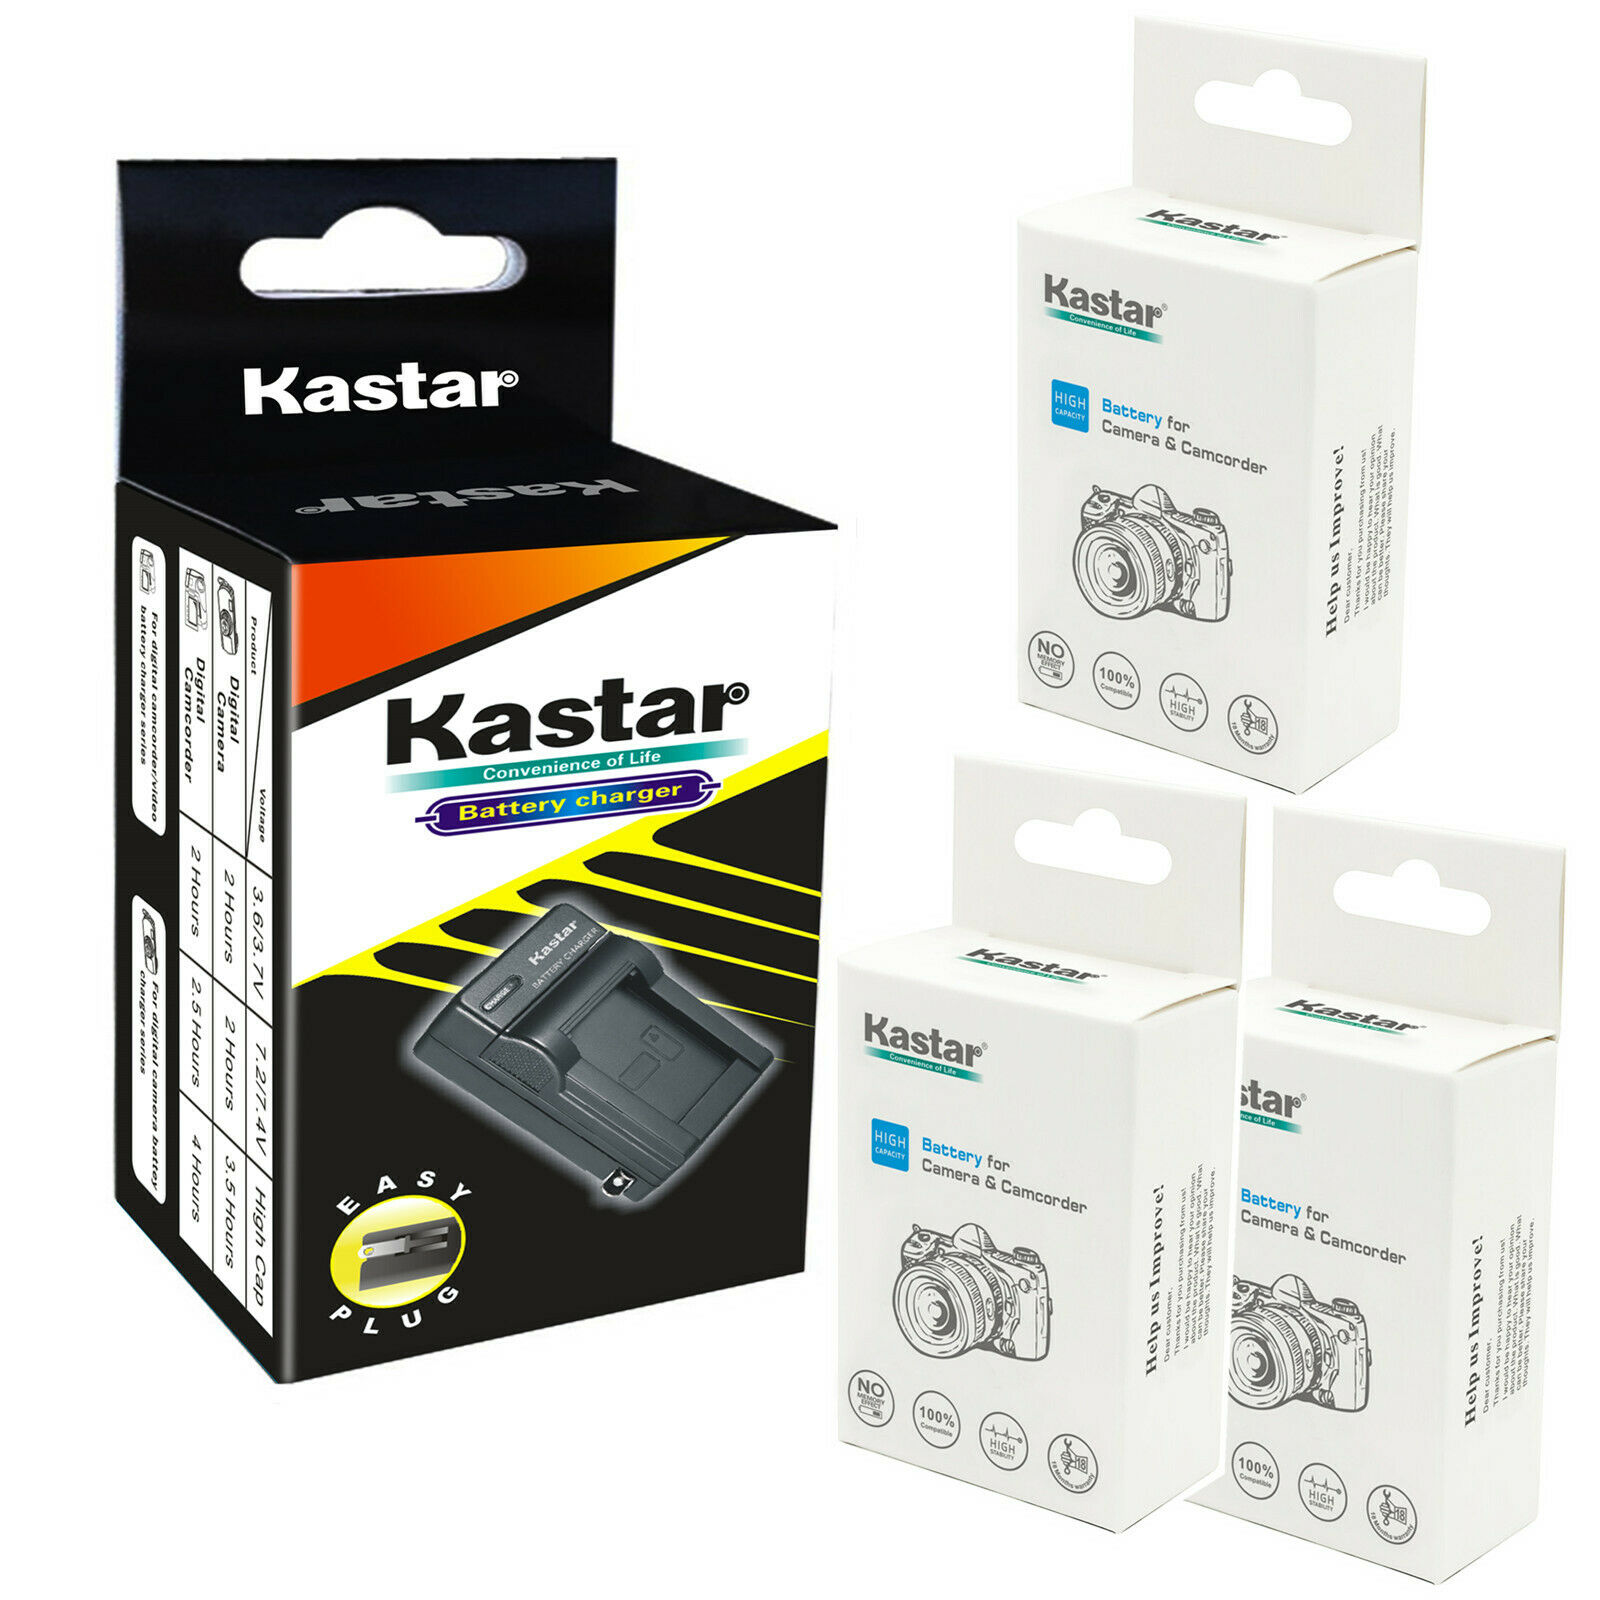 Kastar 3-Pack Battery and AC Wall Charger Replacement for Canon PowerShot SD850 IS, PowerShot SD870 IS, PowerShot SD880 IS, PowerShot SD890 IS, PowerShot SD900 IS, PowerShot SD950 IS Cameras - image 5 of 5